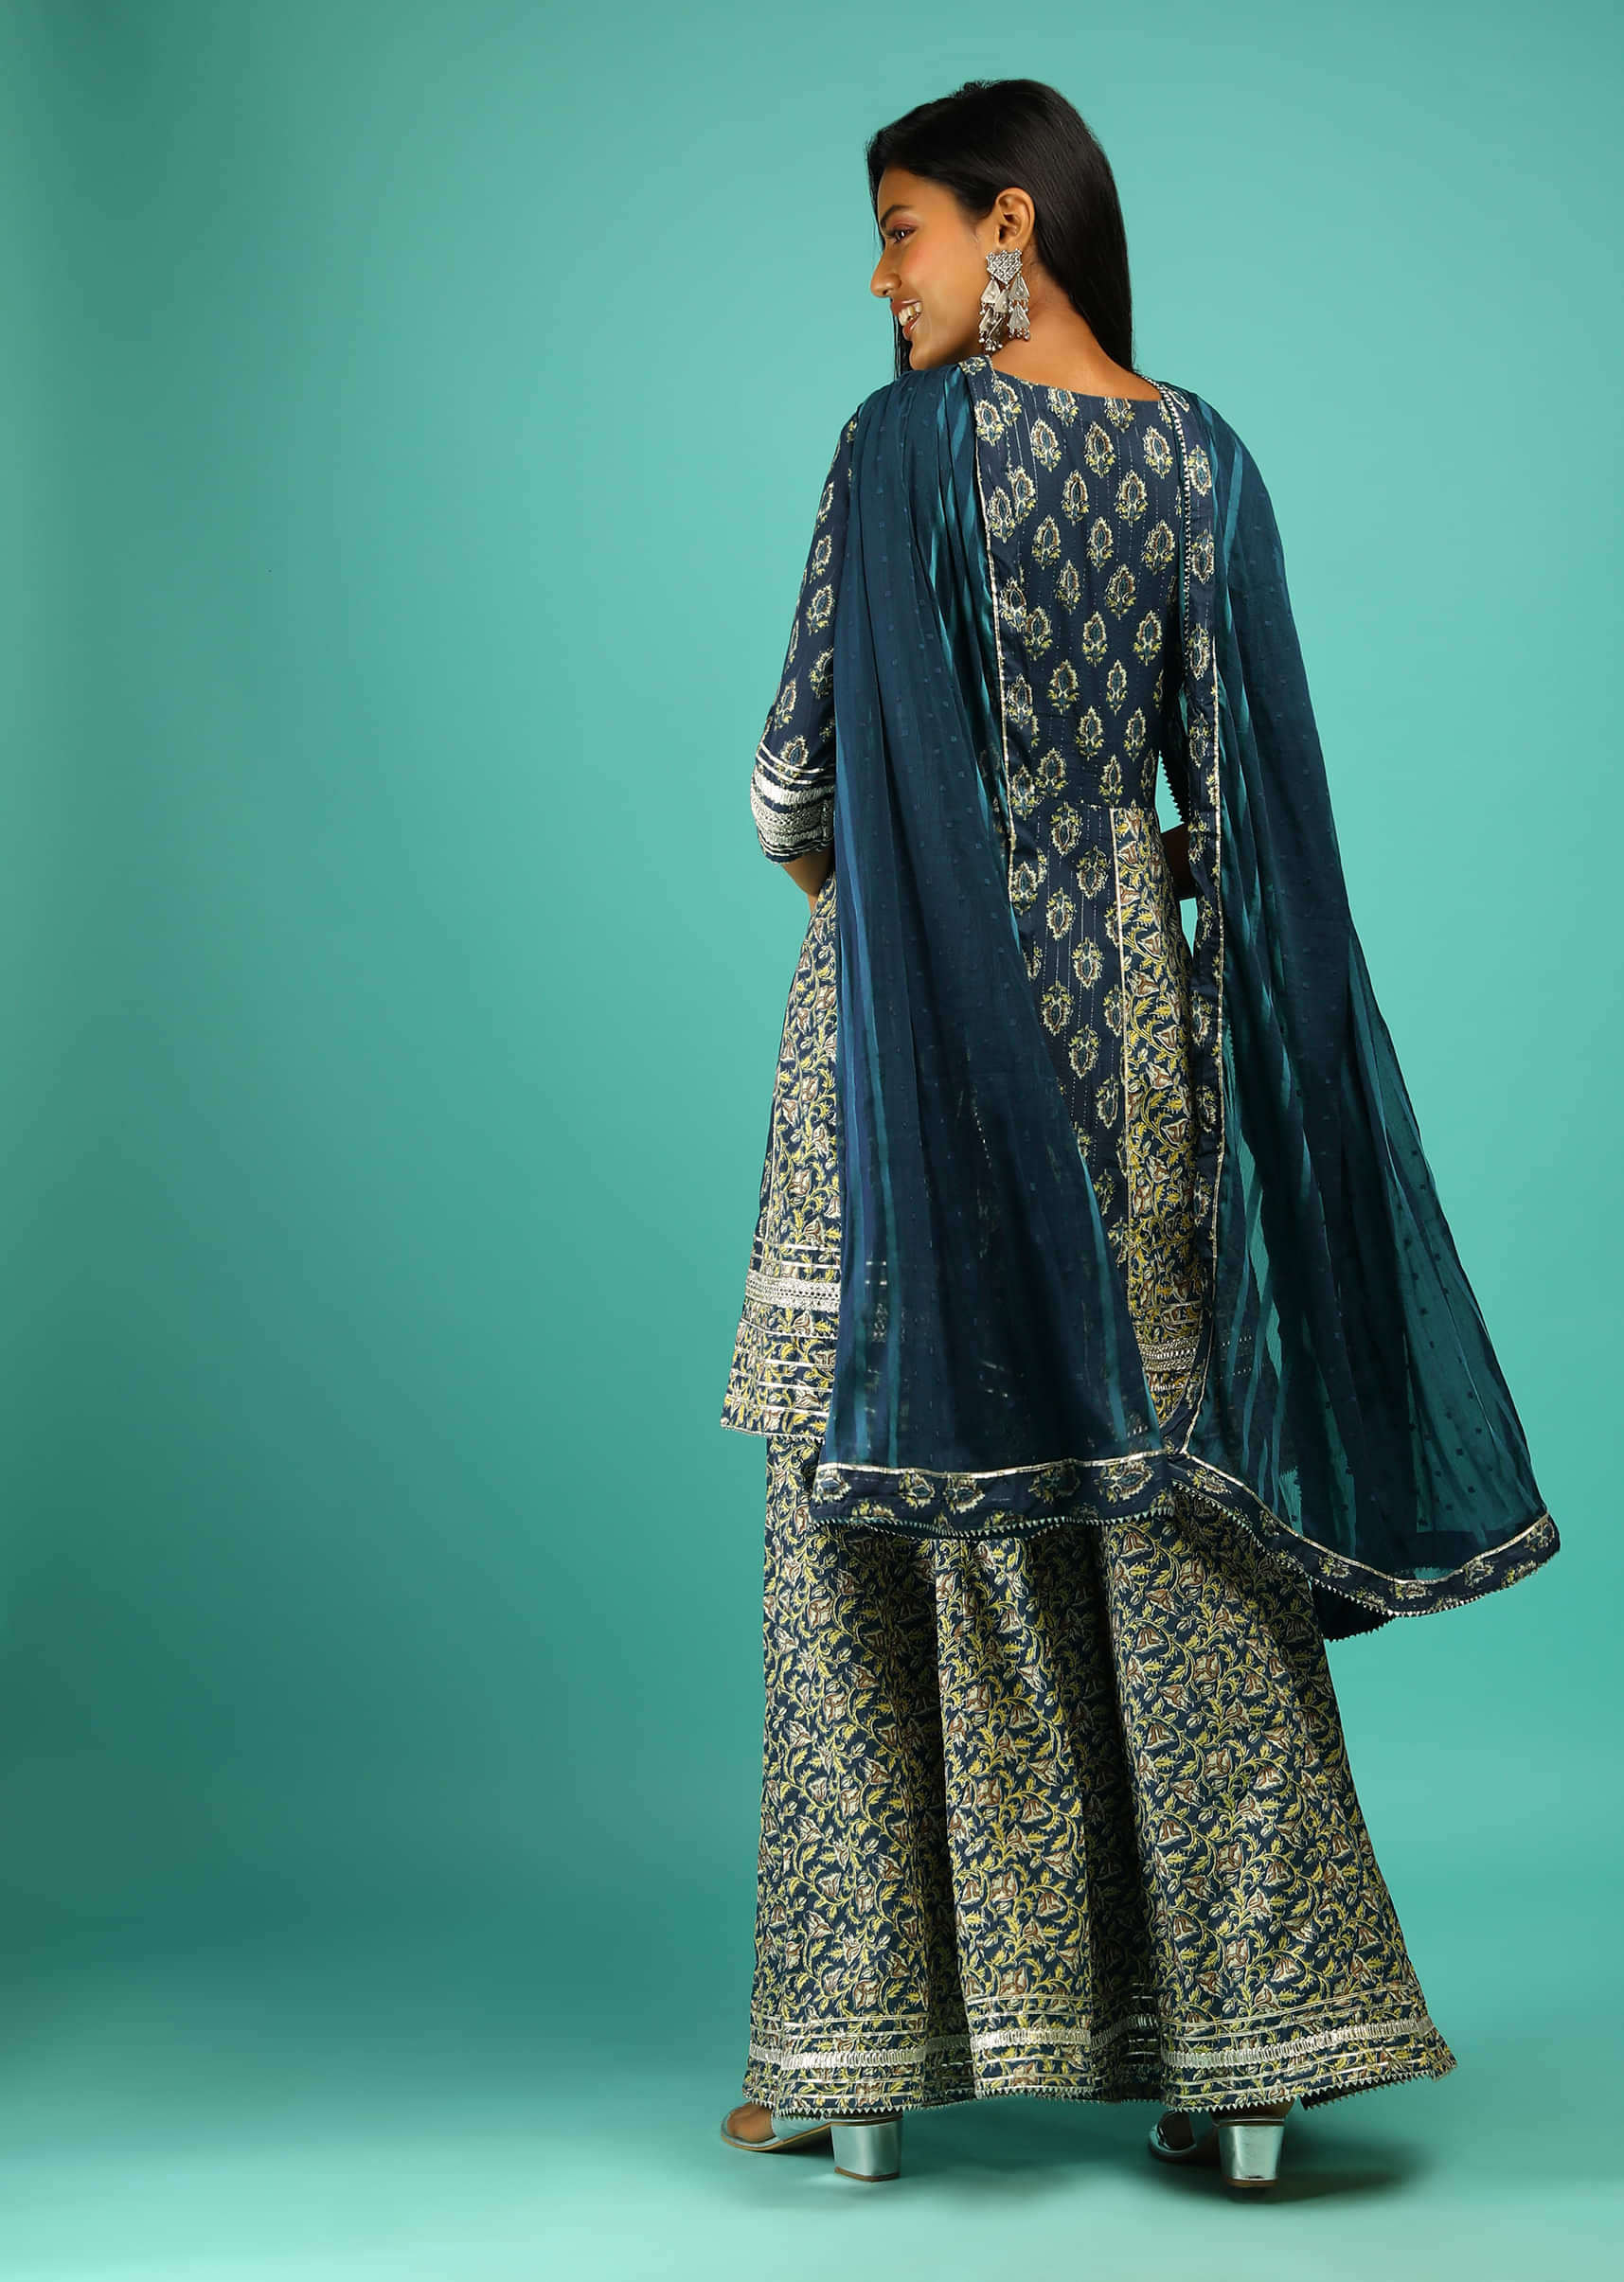 Peacock Blue Sharara Suit In Cotton With Multi Colored Block Printed Floral Buttis And Gotta Lace Work